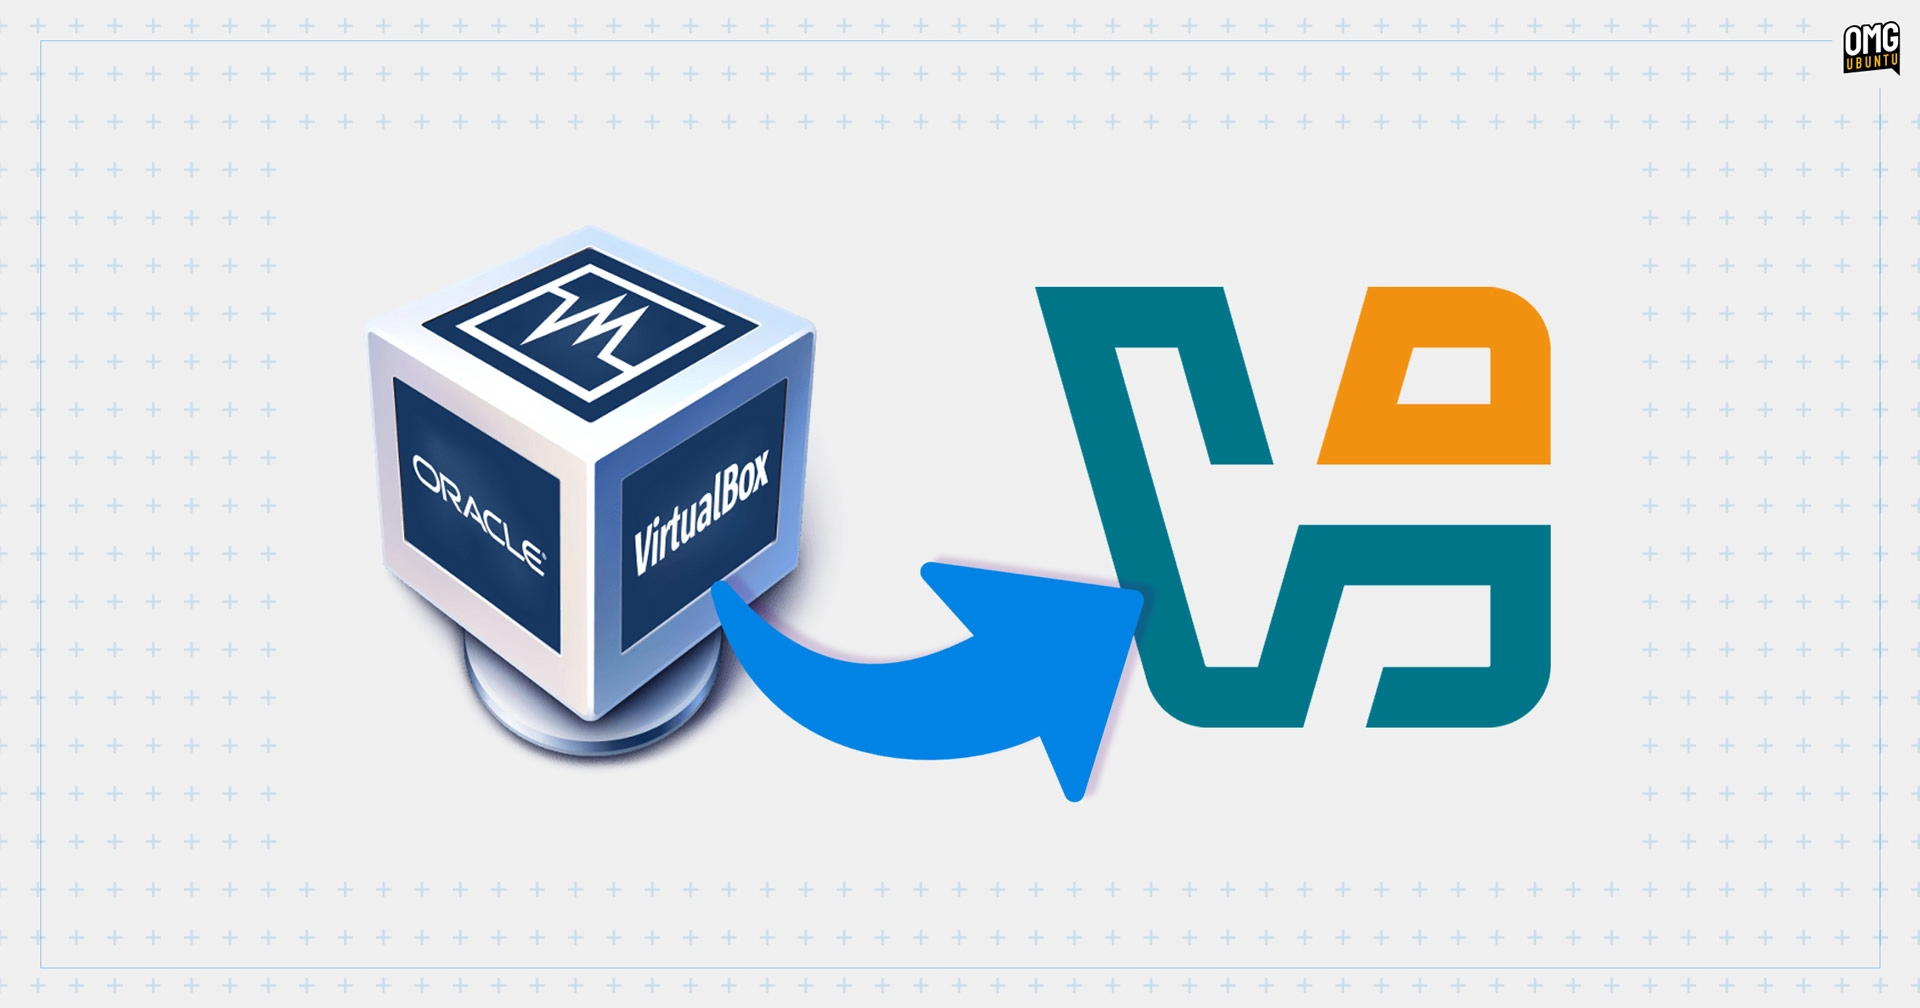 VirtualBox 7.1 Beta Unveiled: Revamped UI, Wayland Clipboard Sharing, and More Exciting Features